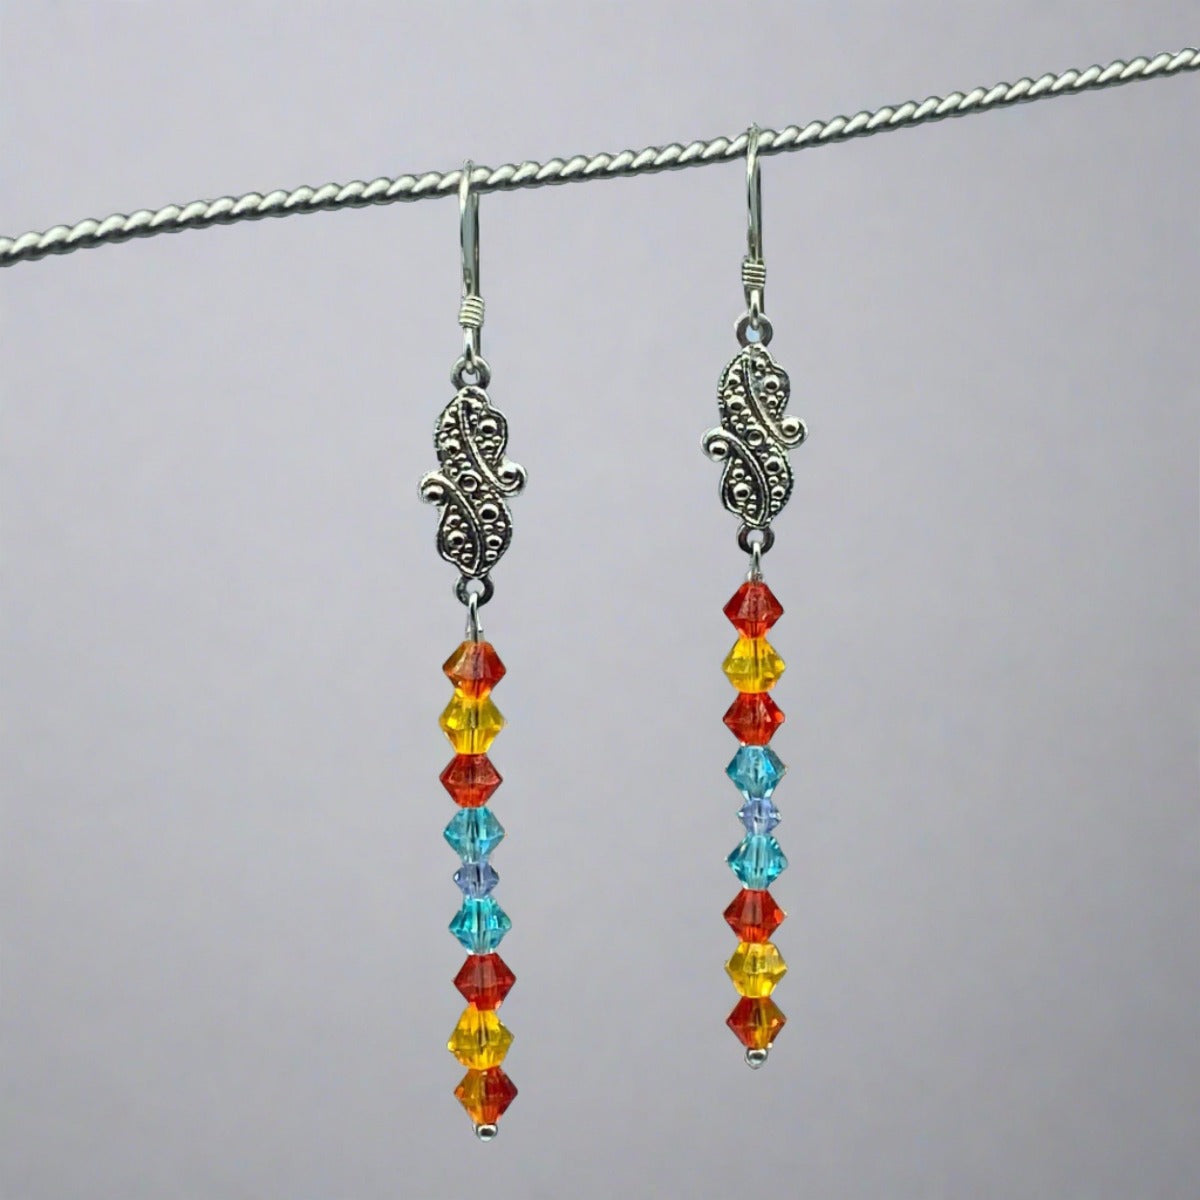 Beach Dreams Chandelier Earrings: Vibrant red-orange, sunshine yellow, and deep sea blue fire-polished crystal adornments create a captivating and colorful design